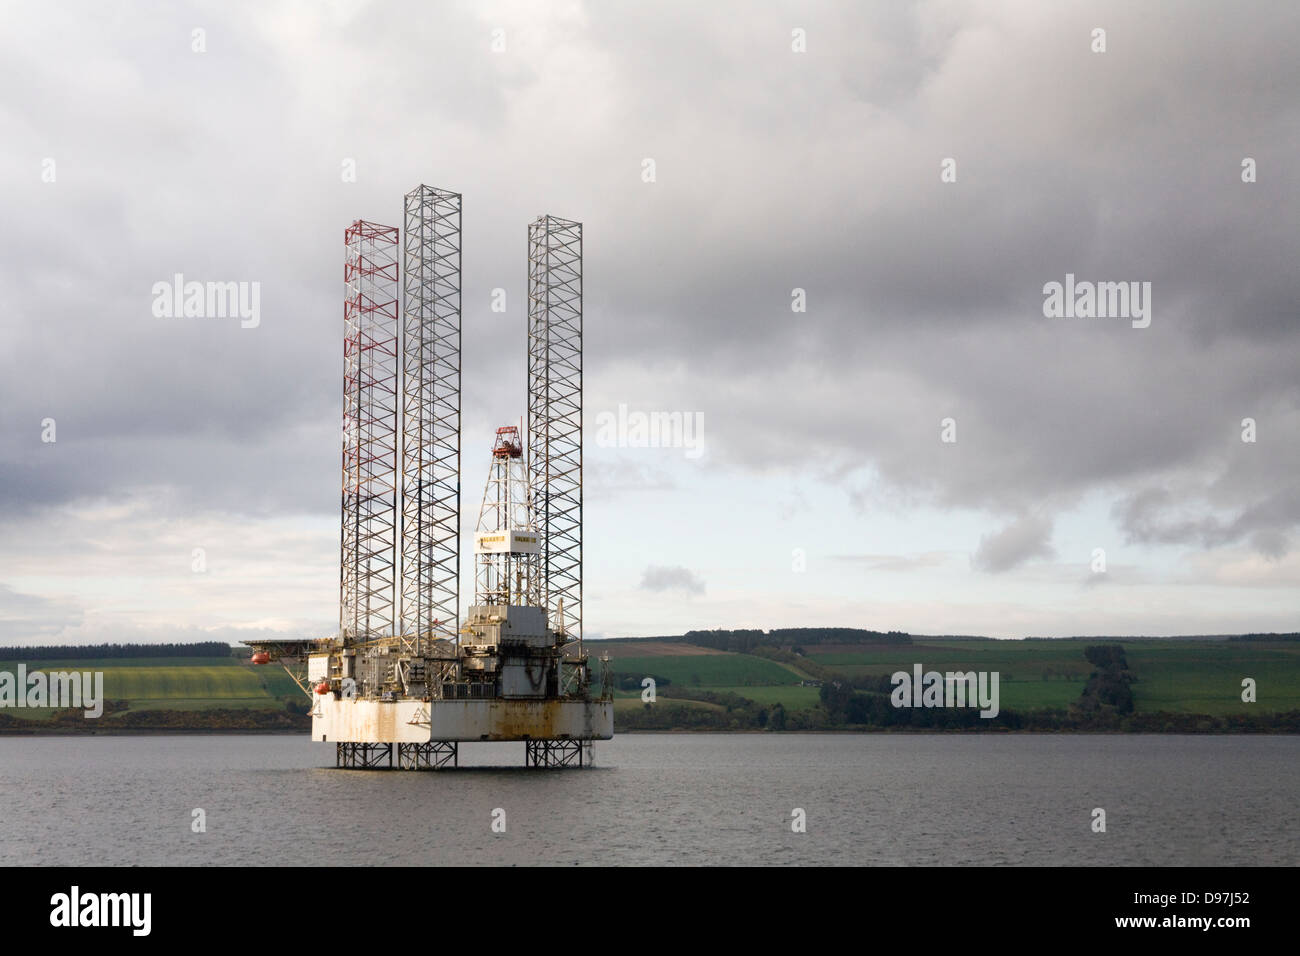 Galaxy 1 Jack up Oil drilling rig Invergordon Cromarty Firth Stock Photo